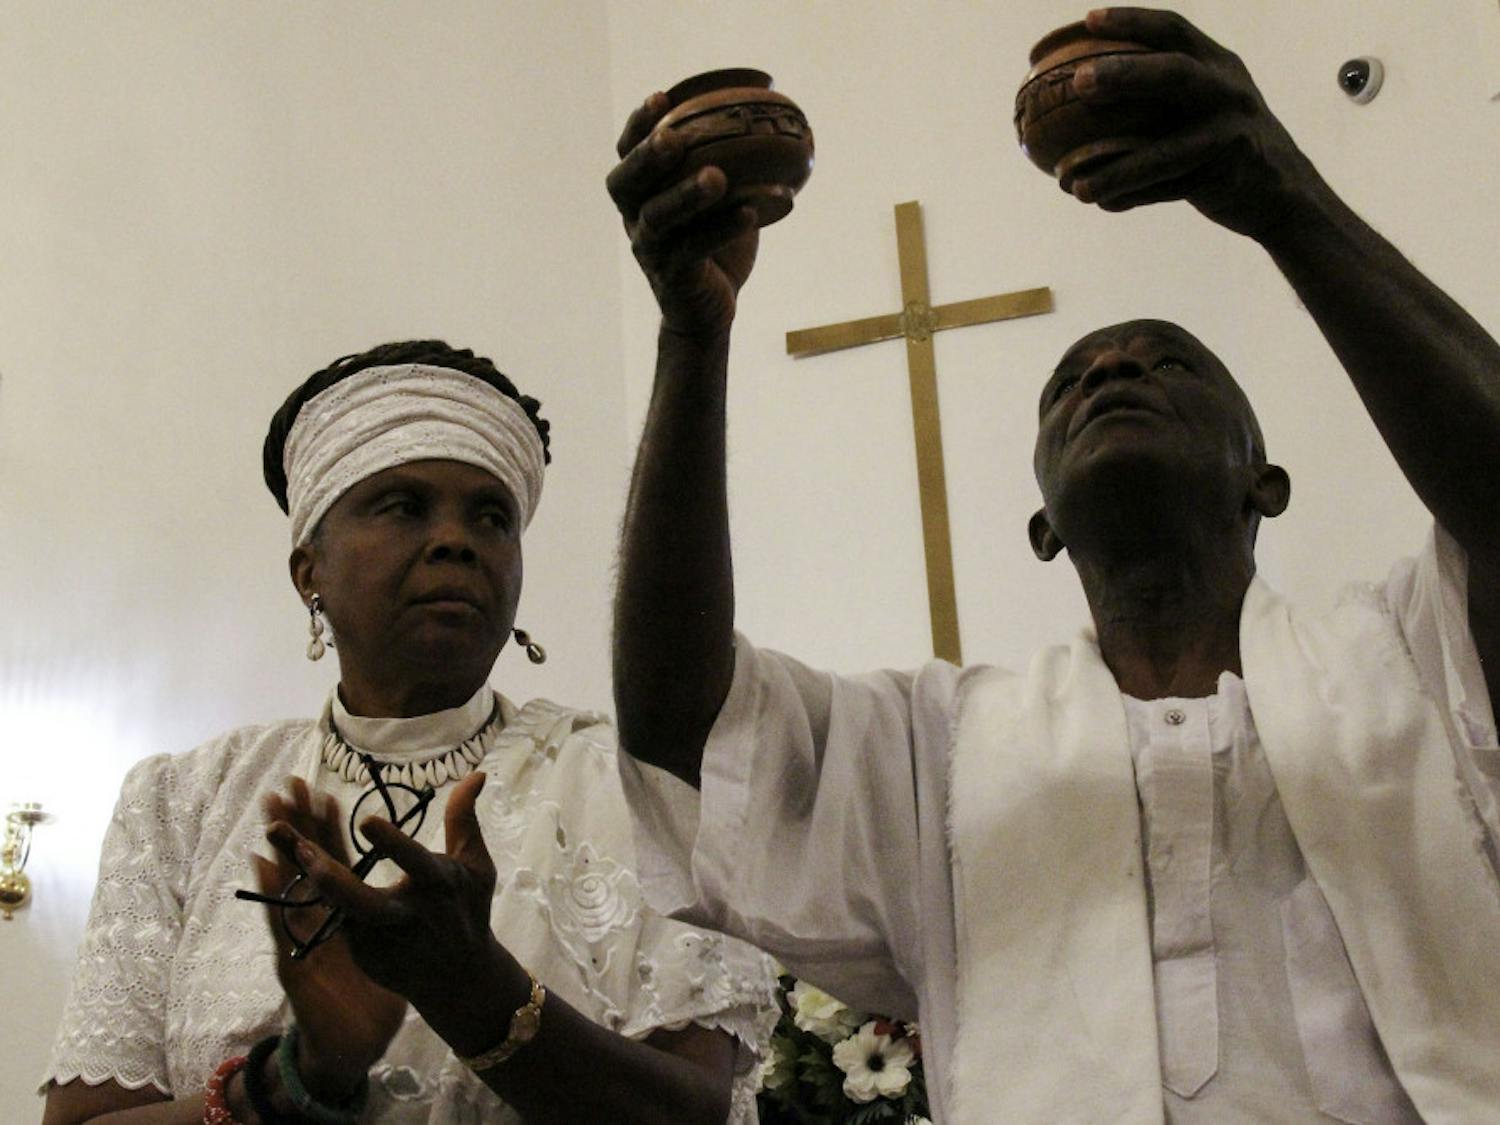 D. Ayoka Sowa-La and her husband, Nii Sowa-La, perform a drum libation, a spiritual ritual involving the pouring of drink as an offering to deities, during the Alachua County lynching memorial service at Mount Pleasant United Methodist Church Friday evening. 